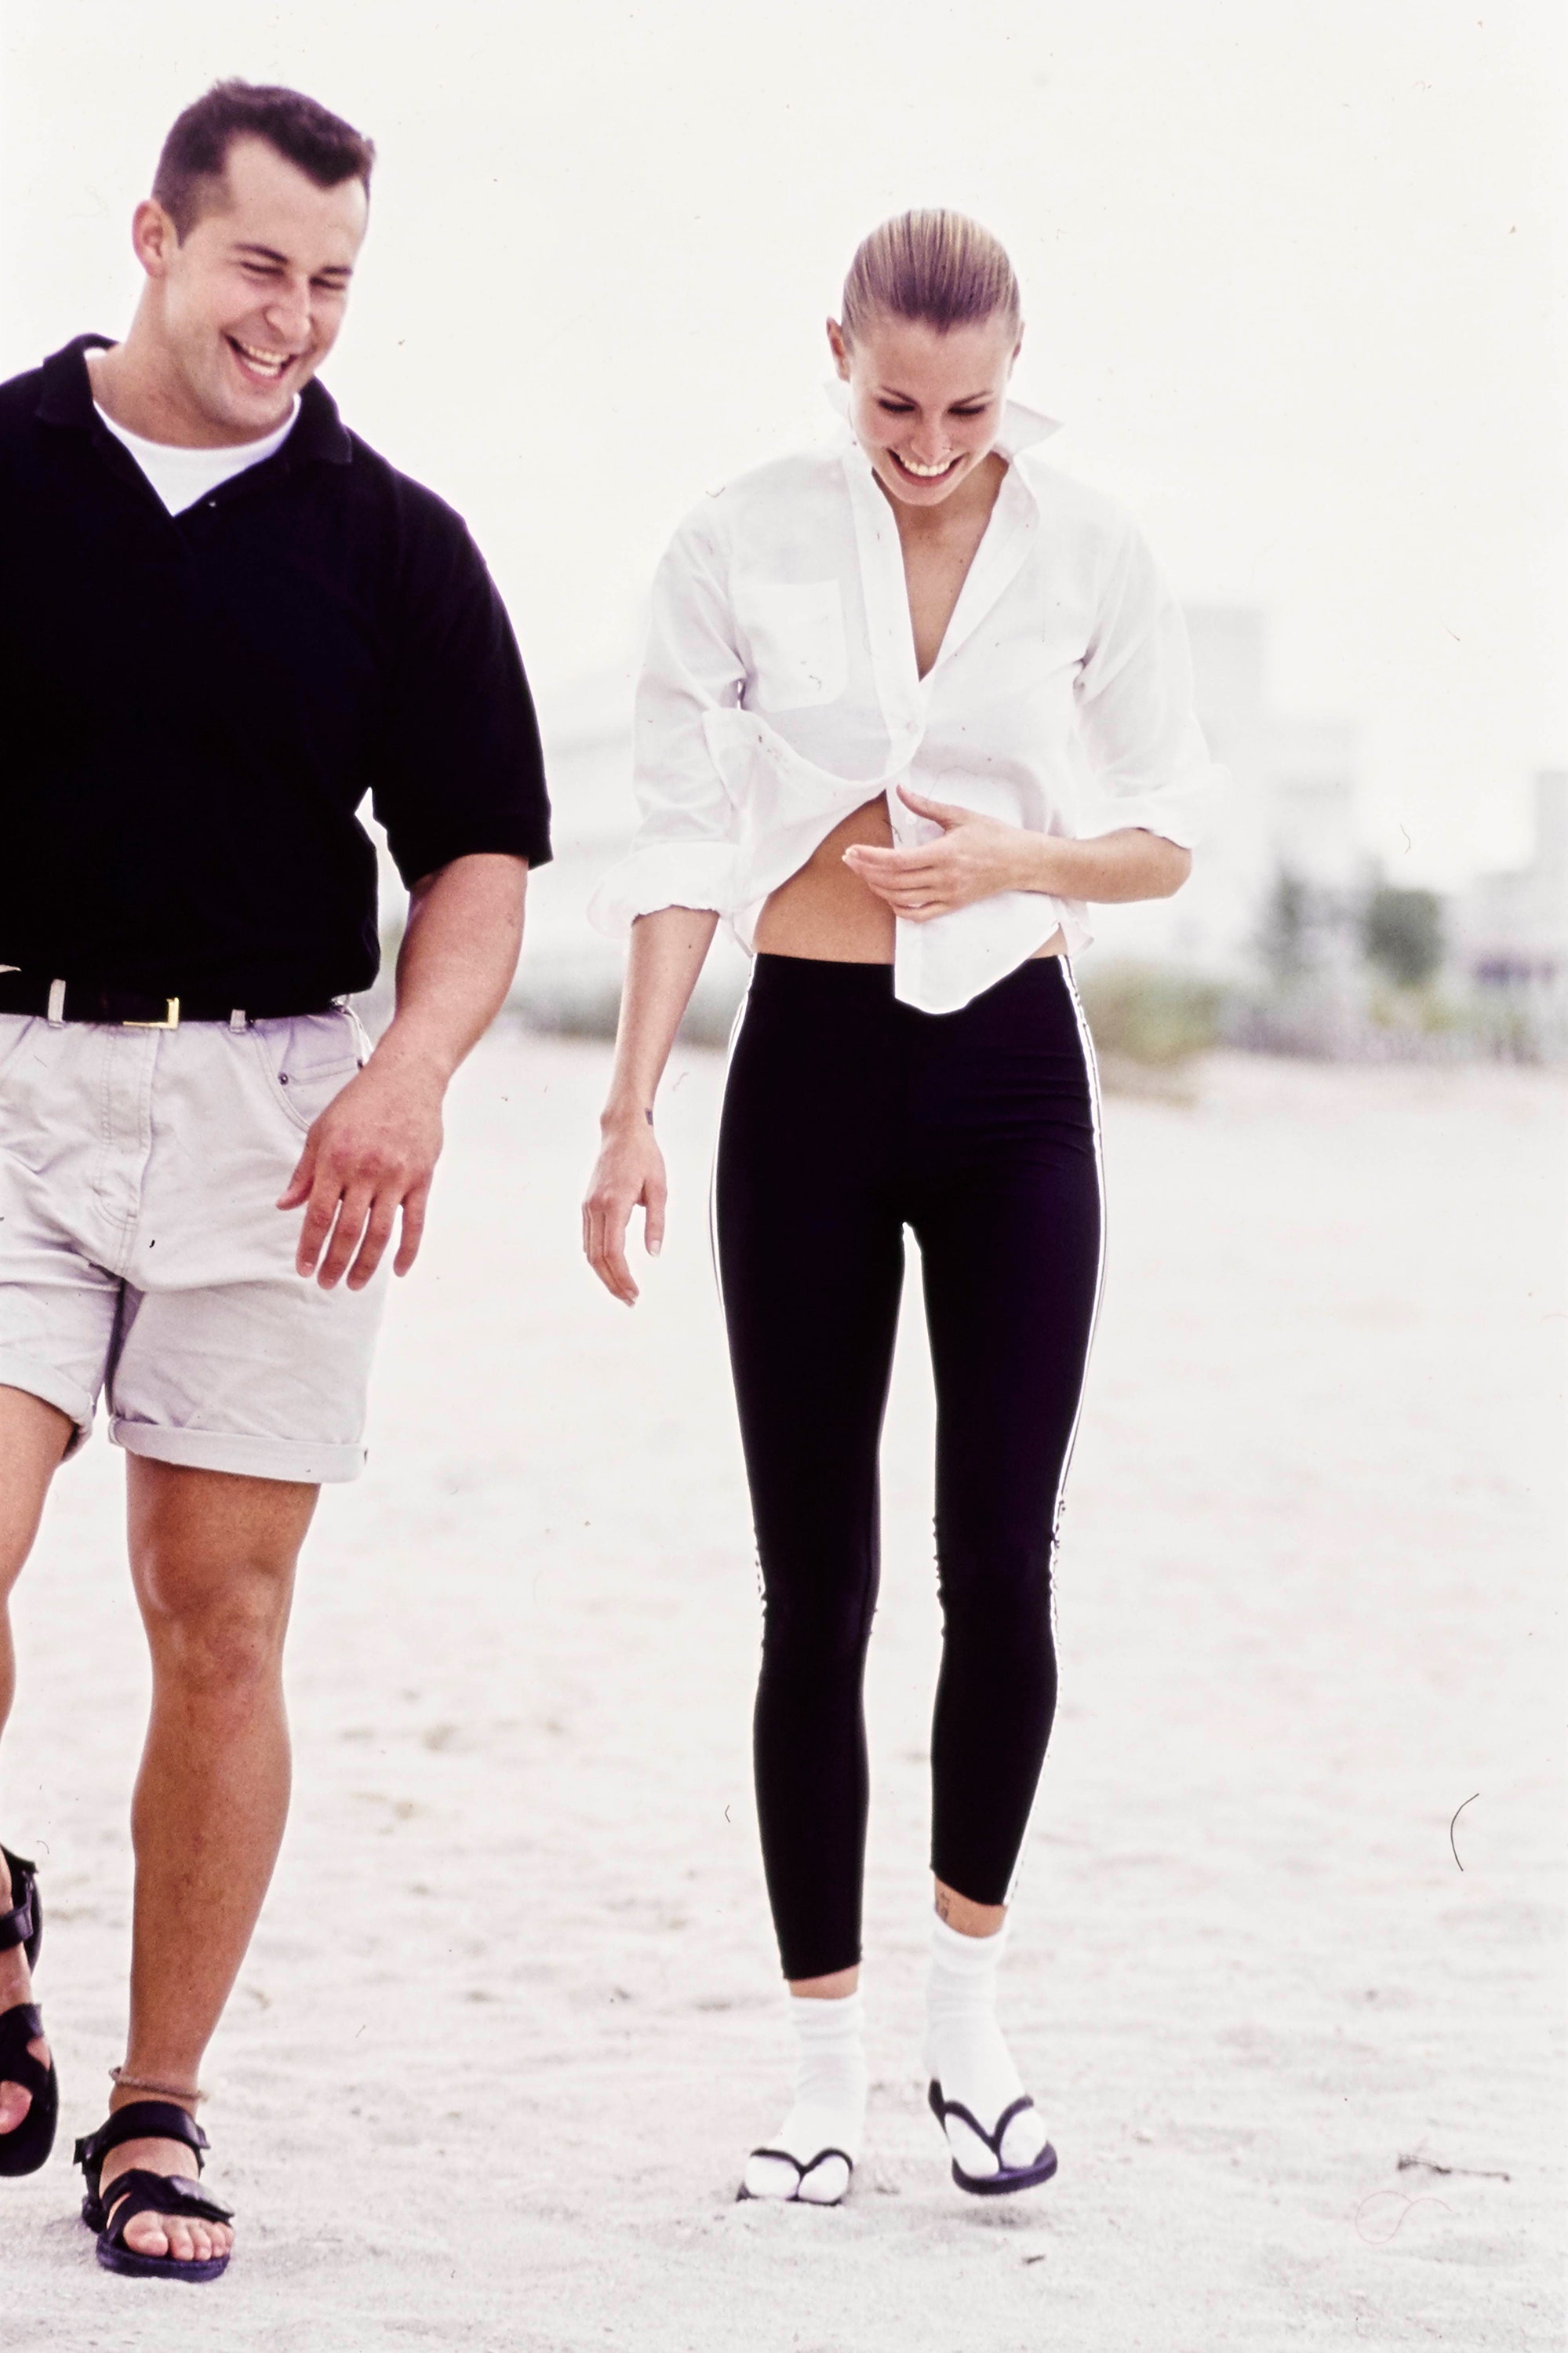 UNSPECIFIED  JANUARY 1  Model Niki Taylor walks on a beach with an unknown male wearing Adidas stretch leggings with a...